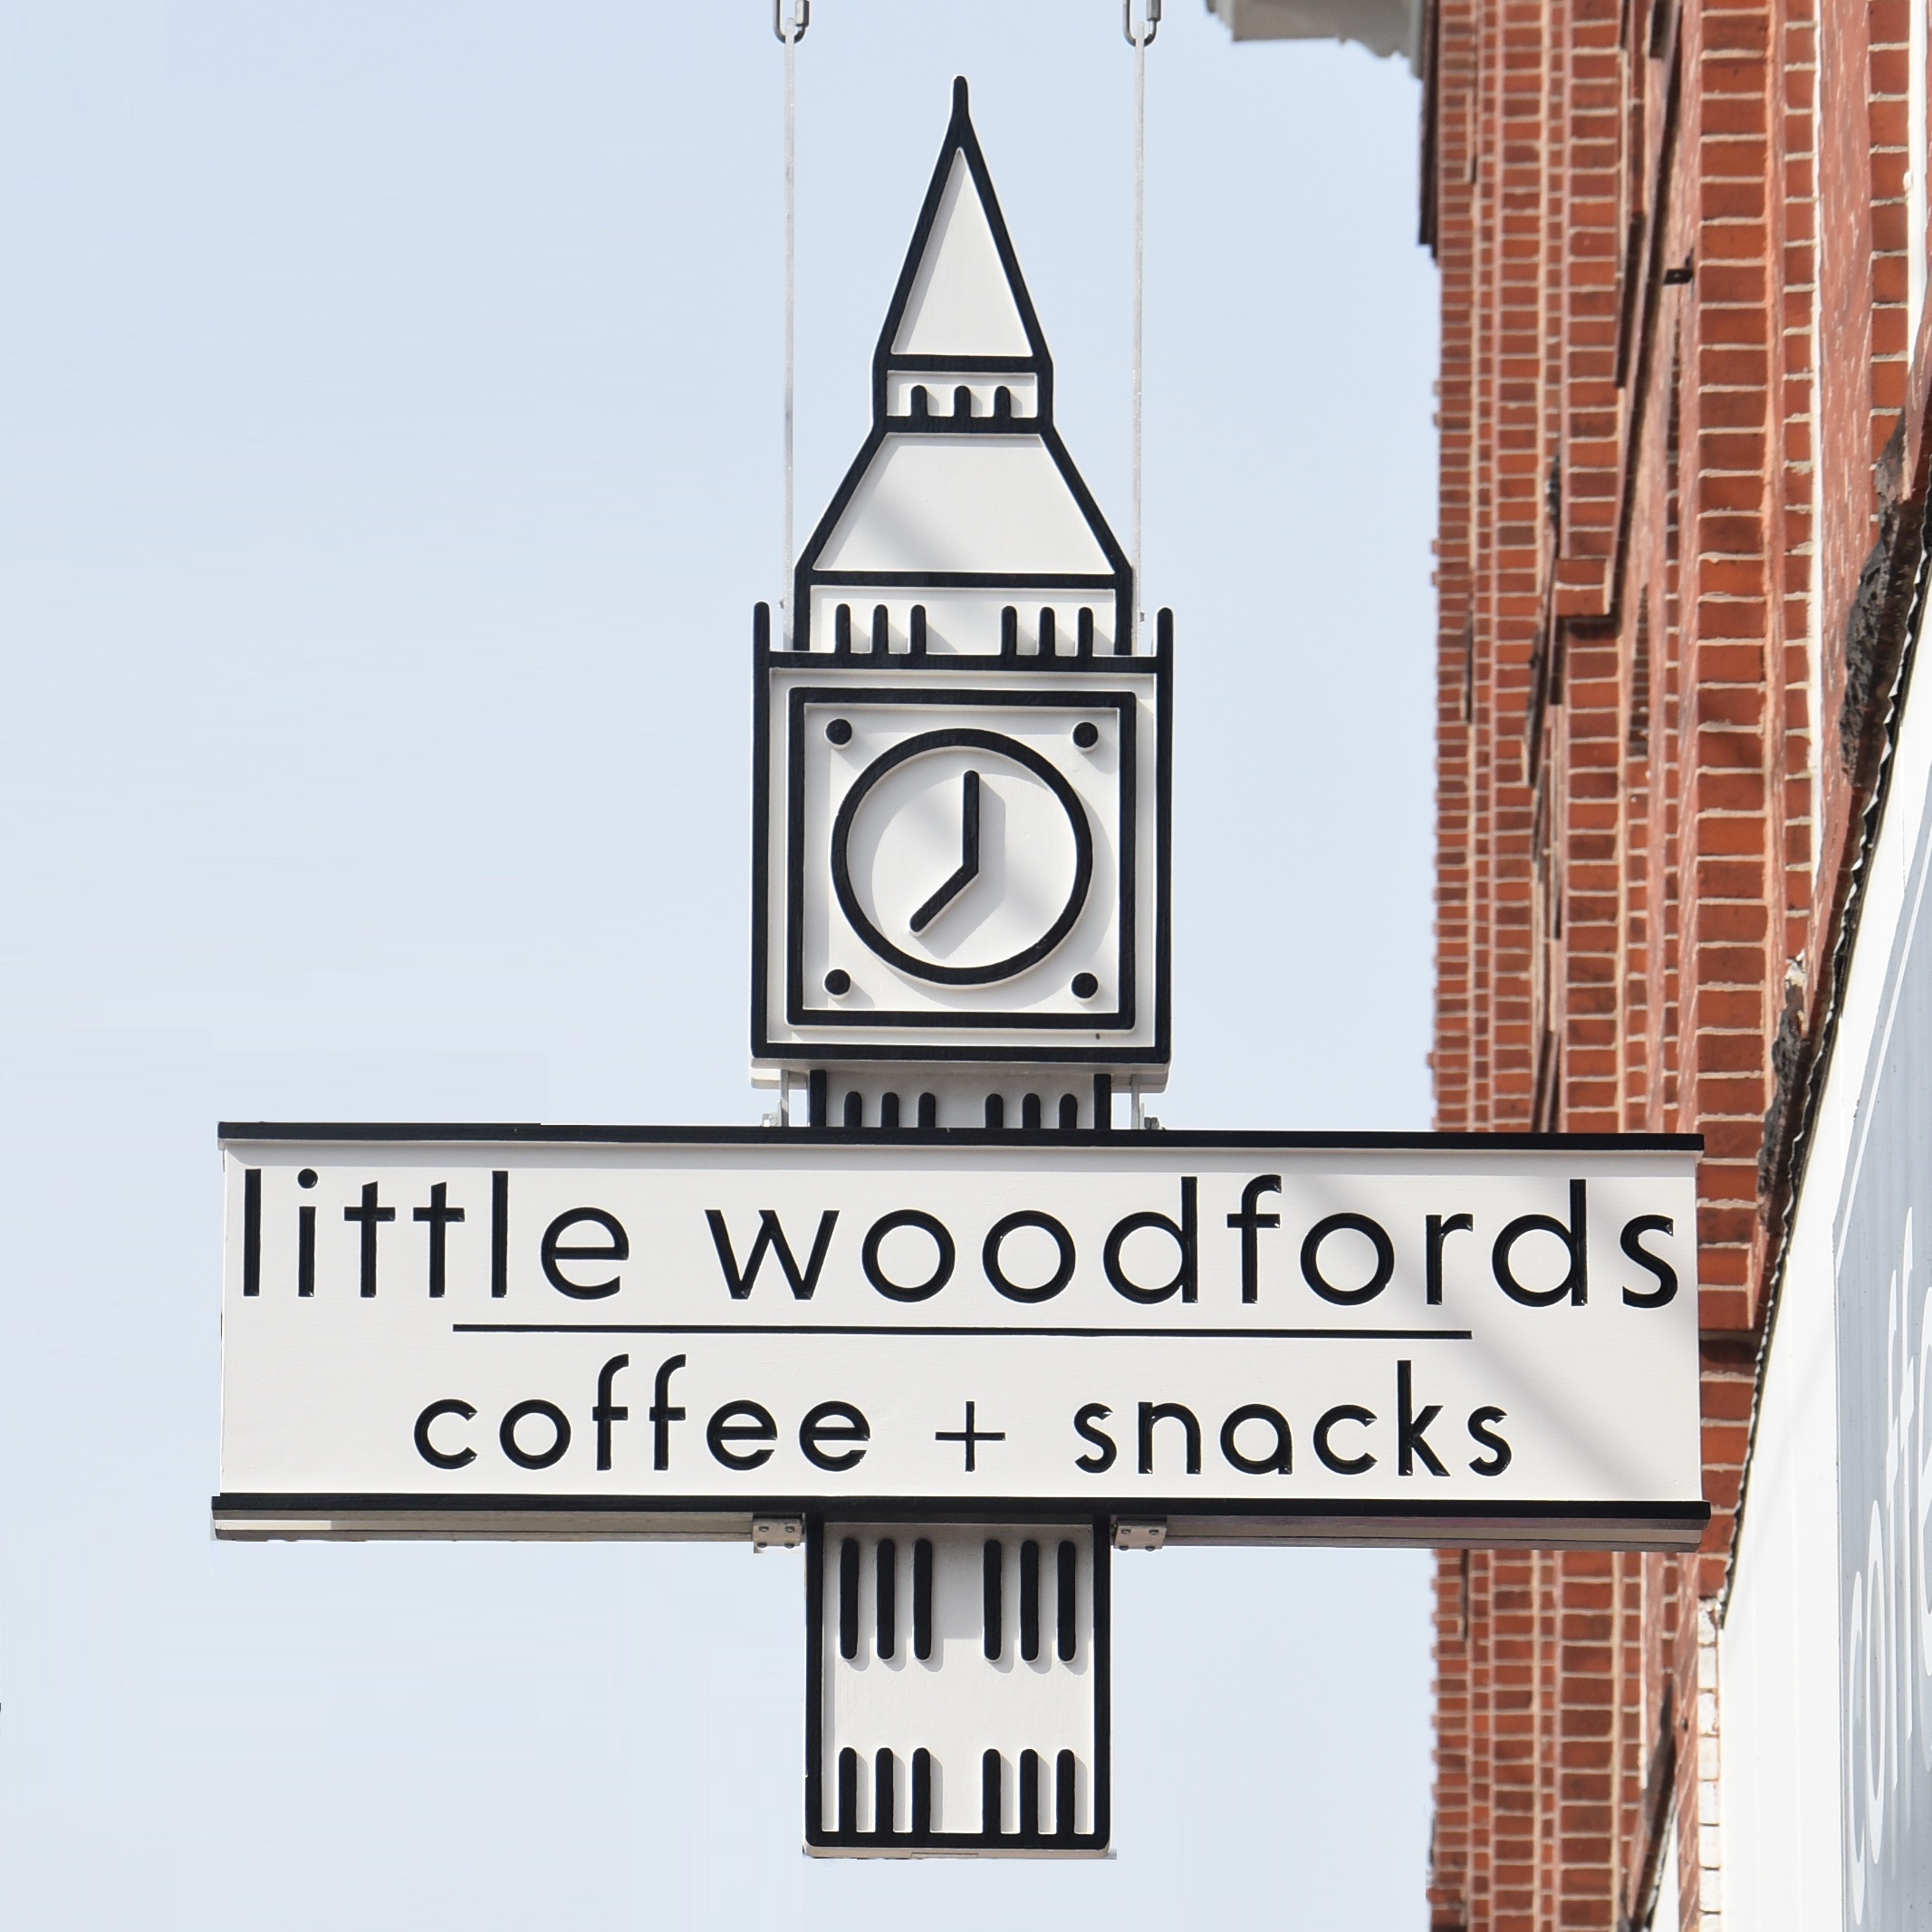 The Little Woodfords sign, hanging outside the store on Forest Avenue in Portland, Maine. It's a design based on the clock tower which sits atop of the building and reads "little woodfords | coffee + snacks".